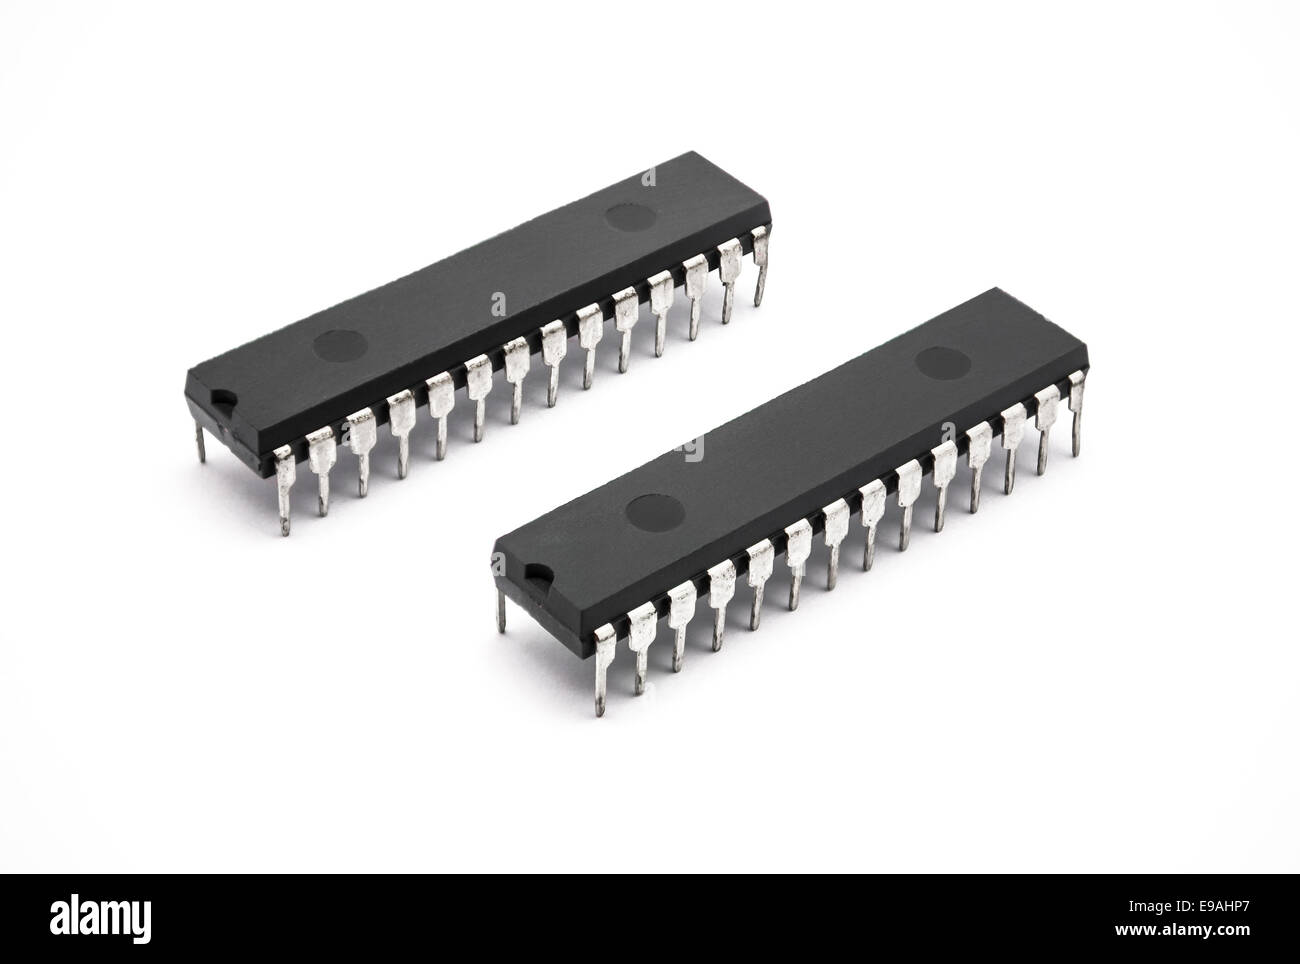 DIP IC [Dual Inline Package Integrated Circuit]. Stock Photo